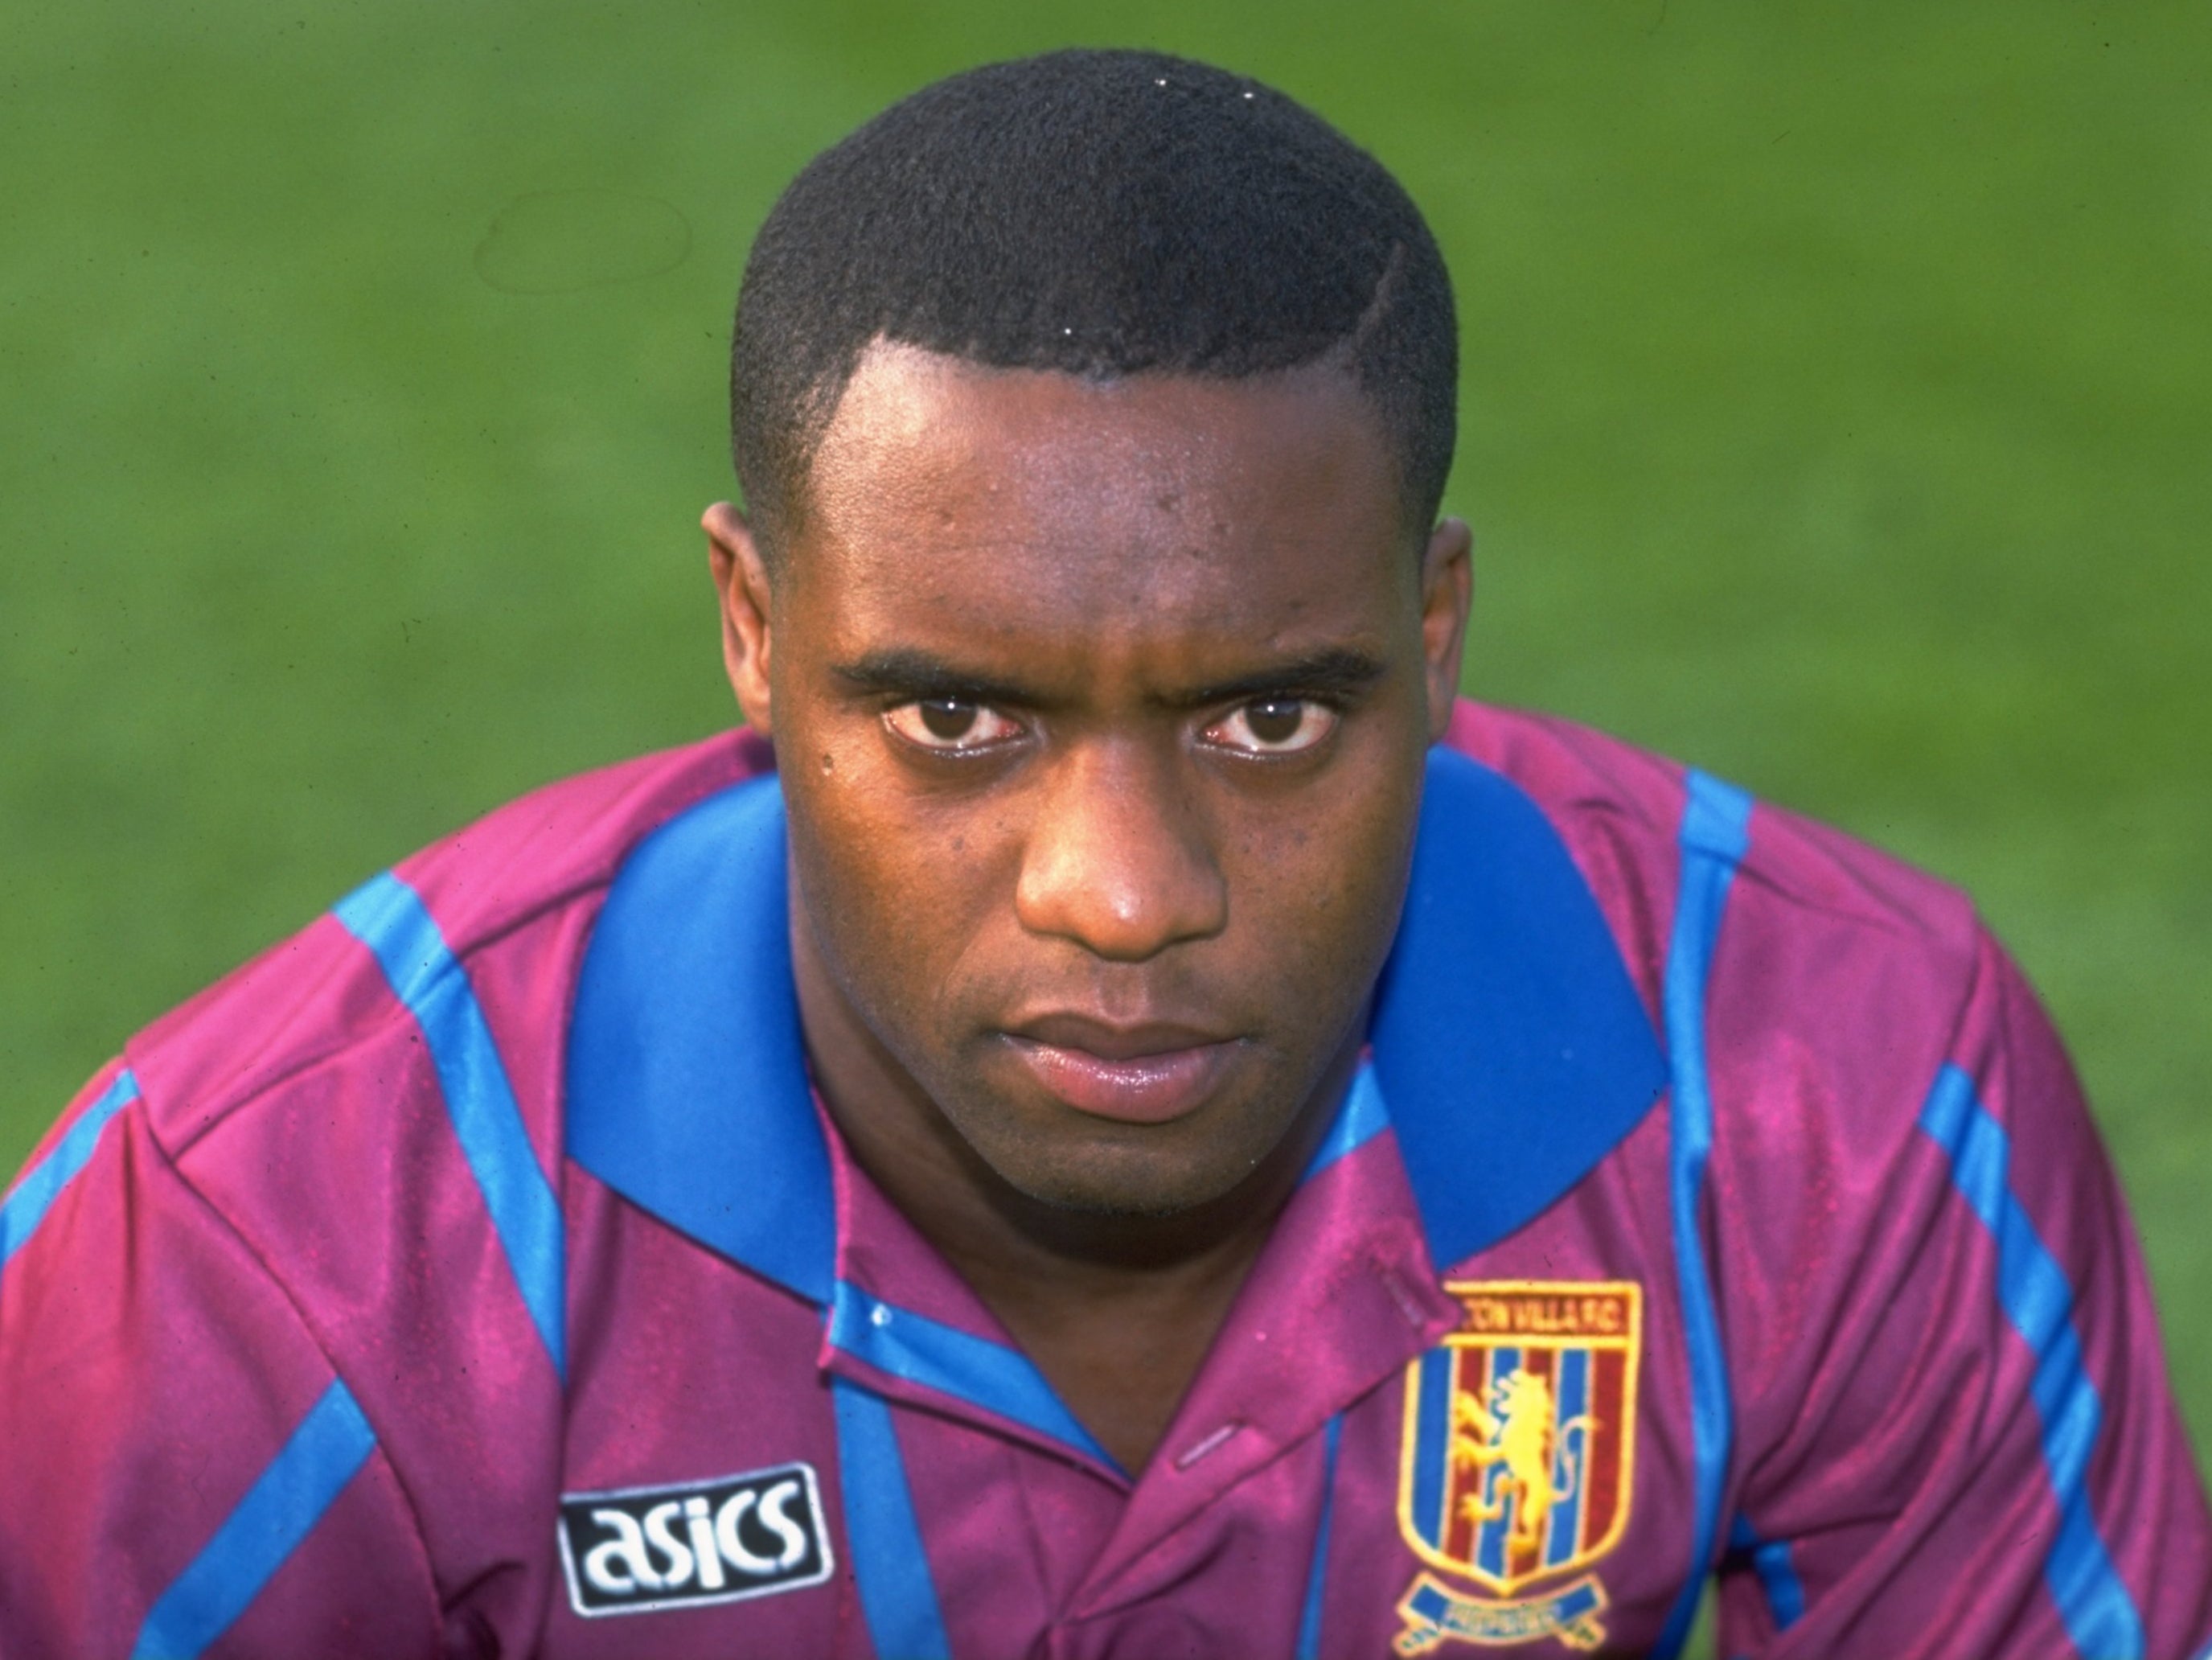 Dalian Atkinson died after being tasered for 33 seconds, more than six times the standard five-second phase